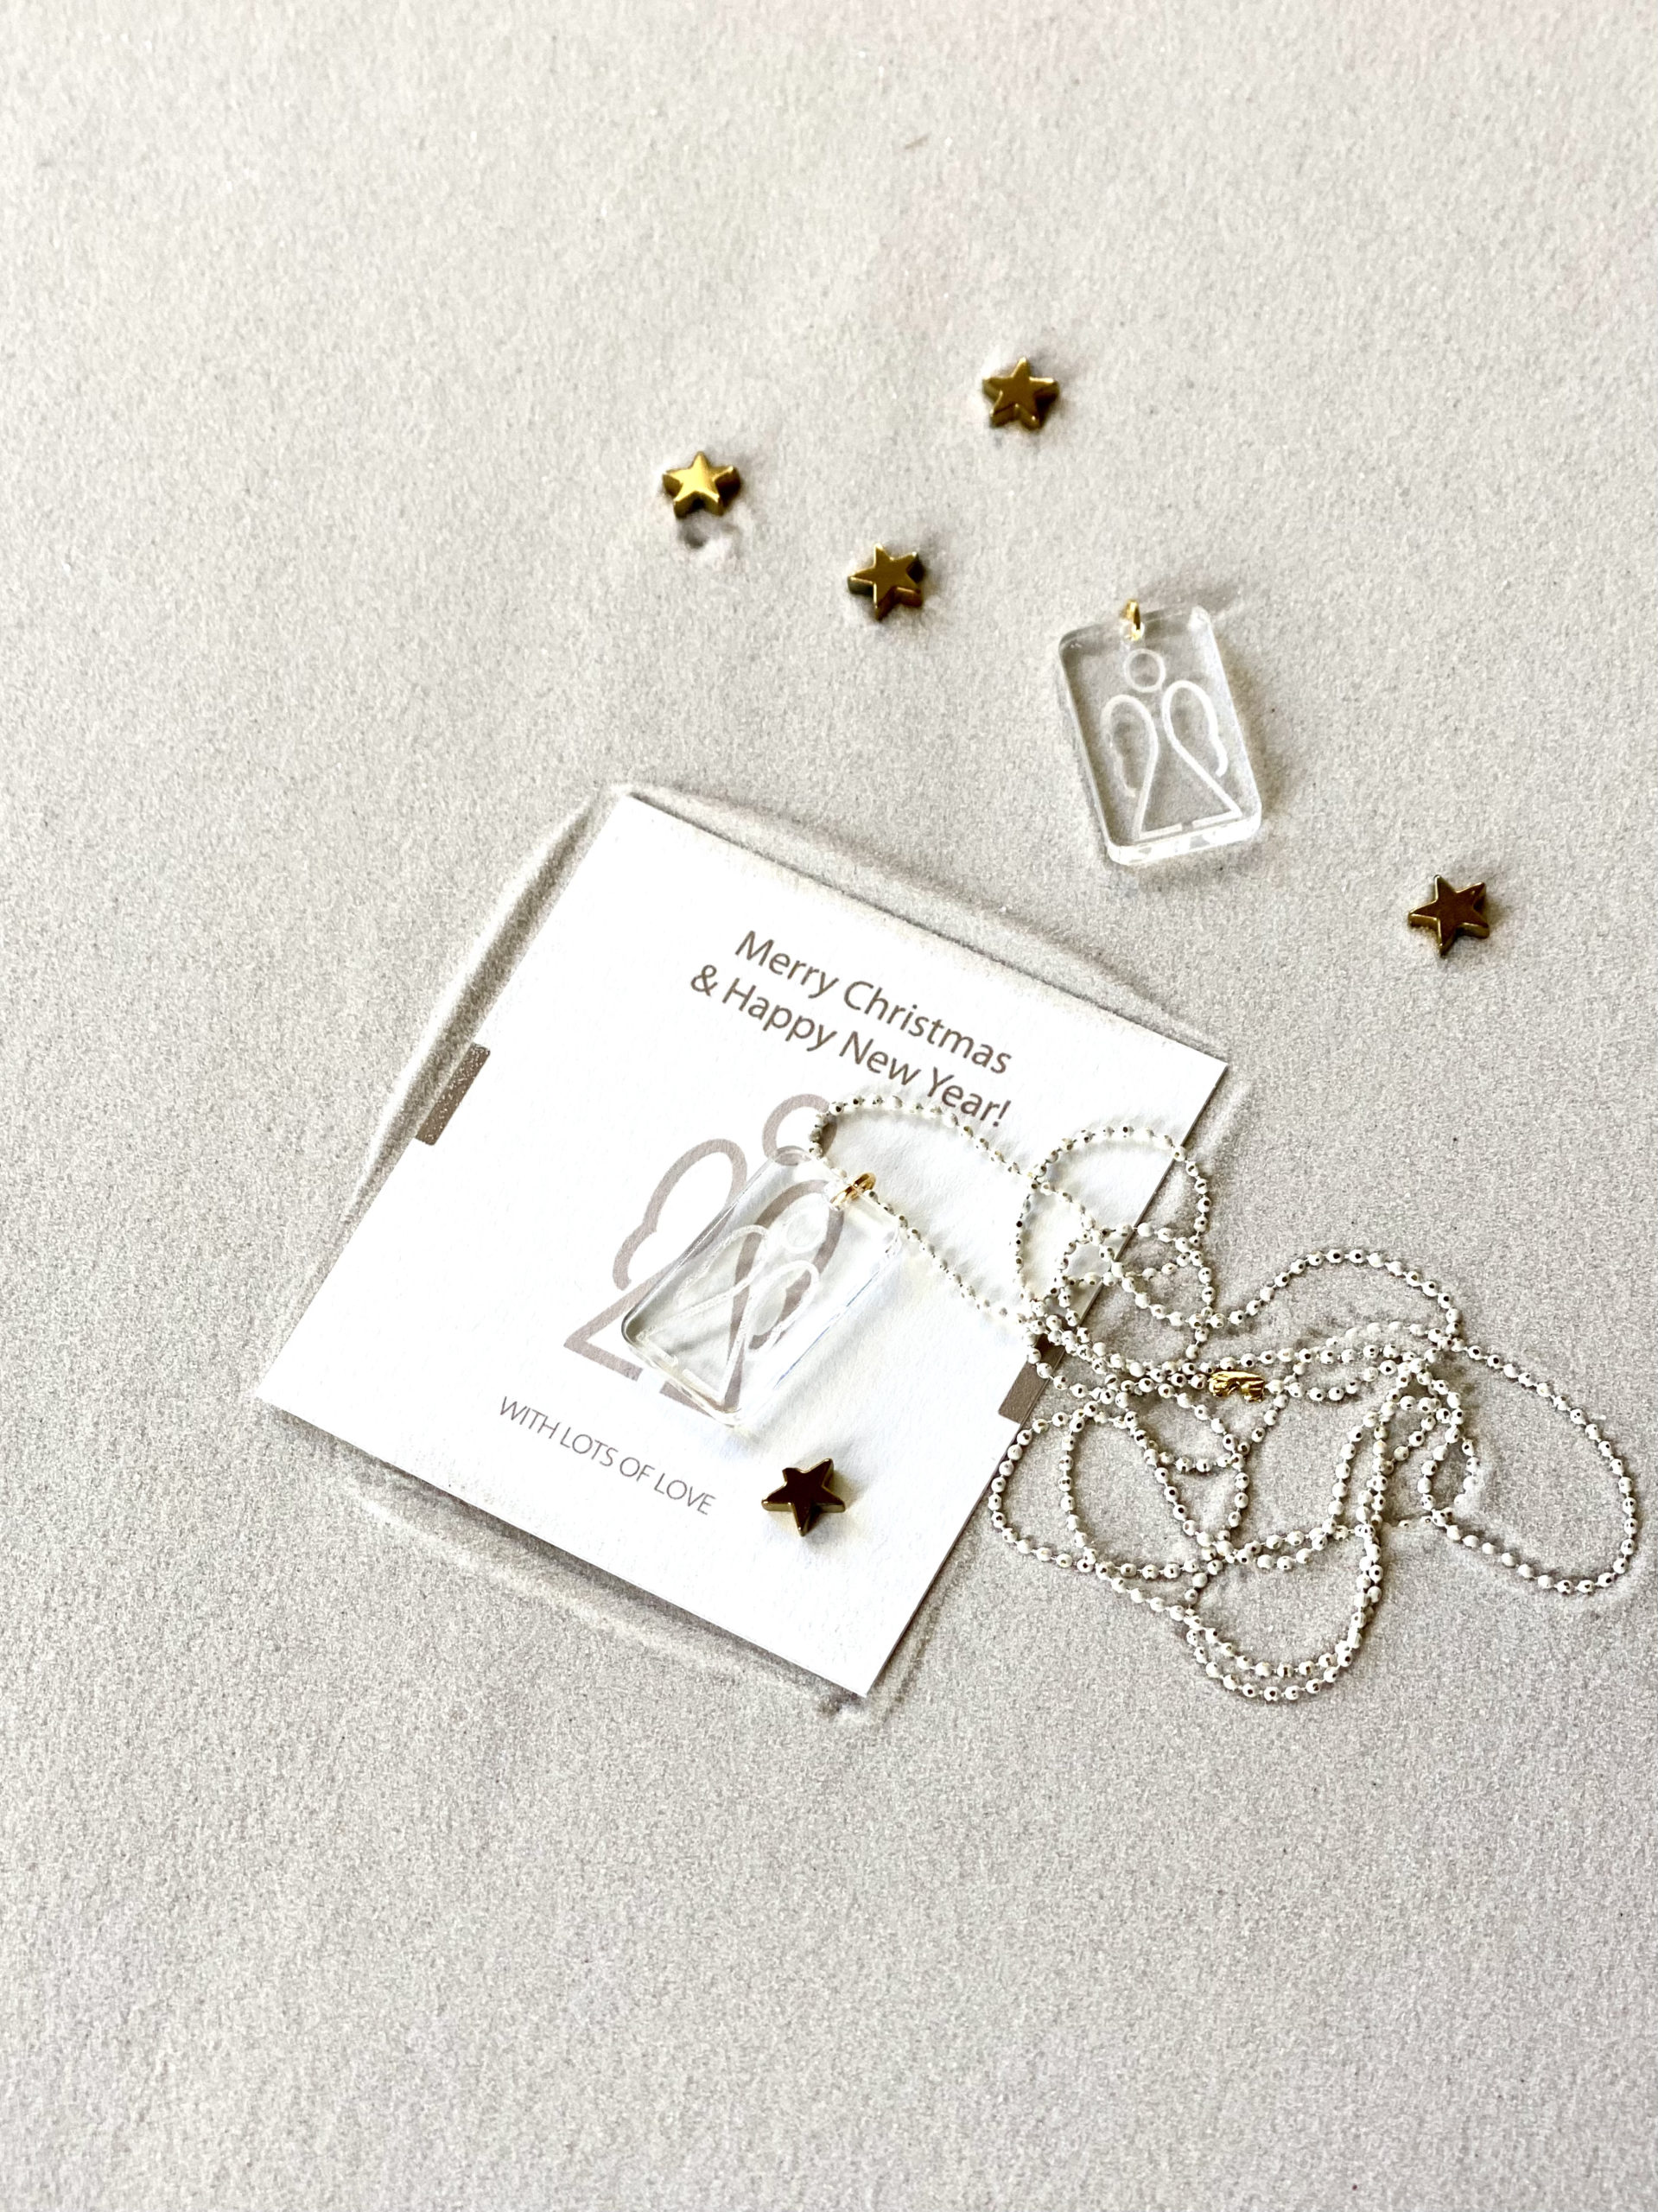 white-christmas-special-occasion-charm-angel-chain-necklace-with-card